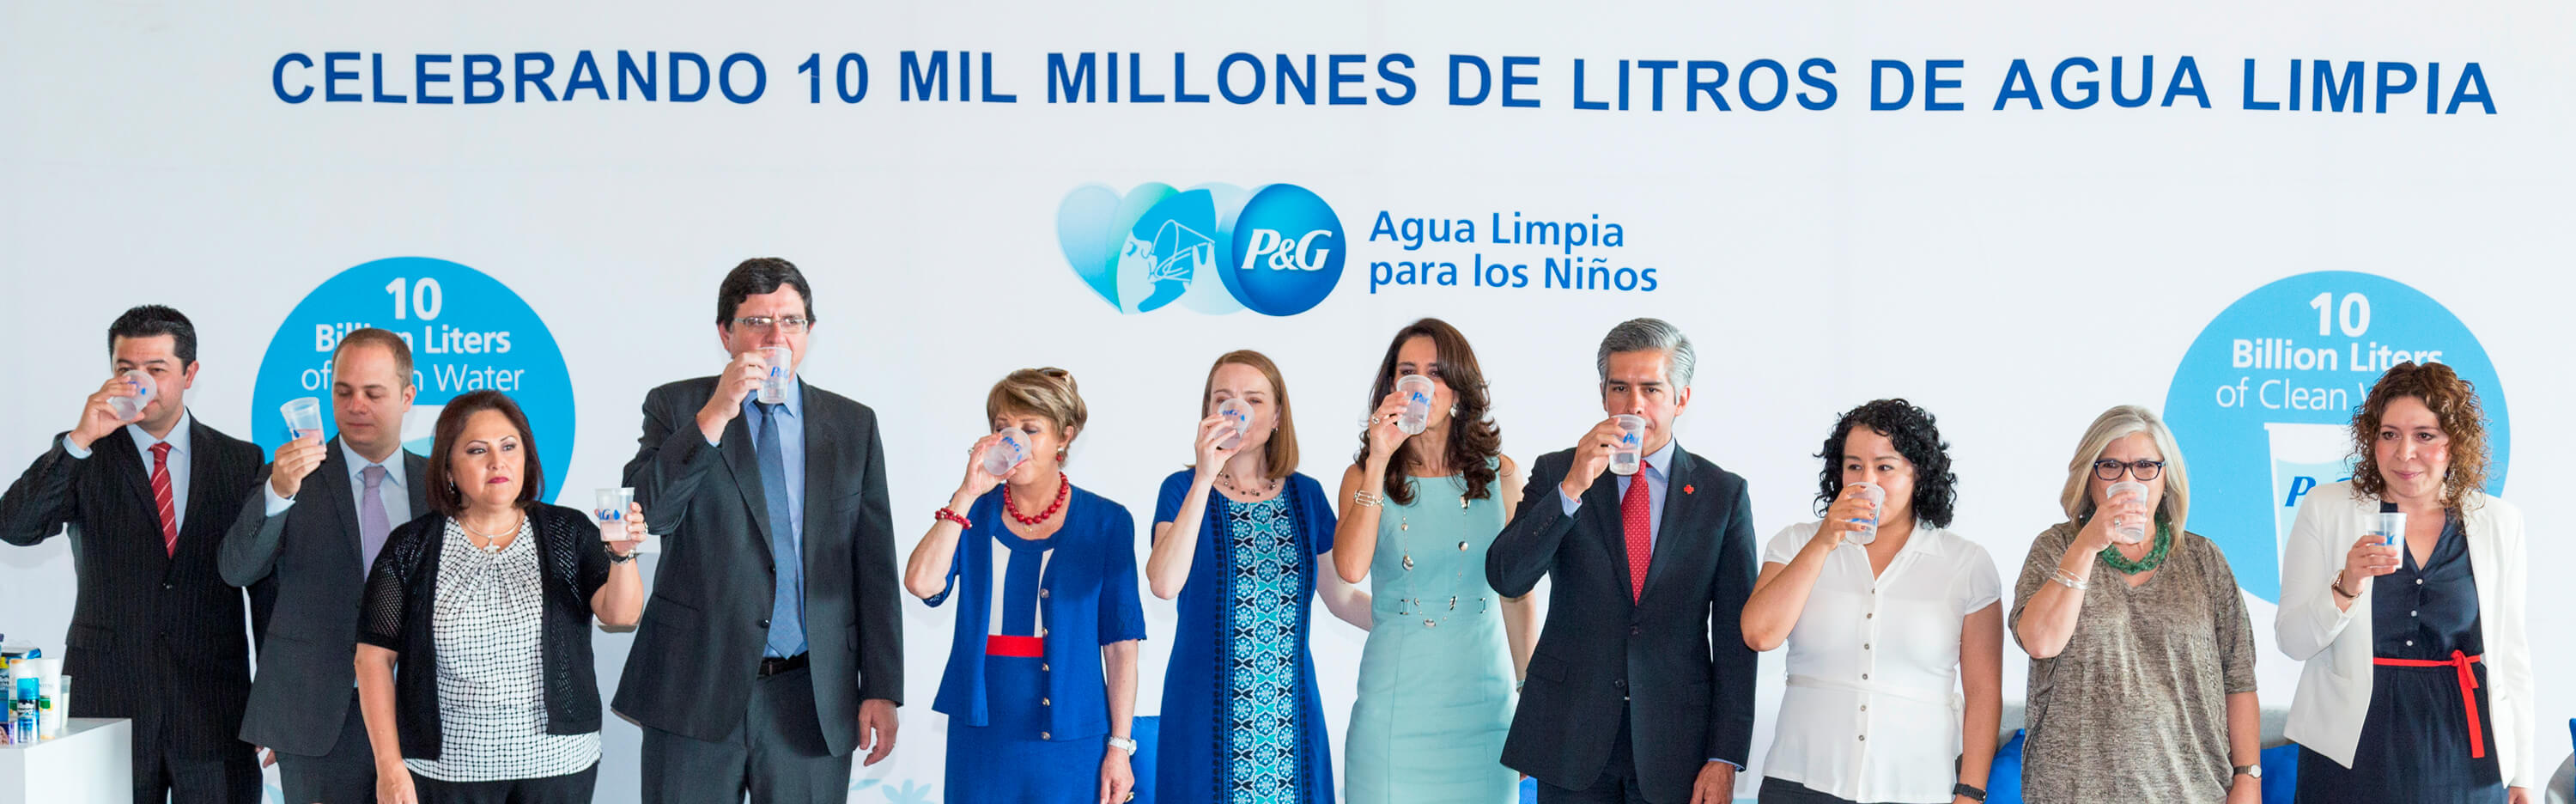 Celebrating 10 Billion Liters of Clean Water with our Partners Around the World